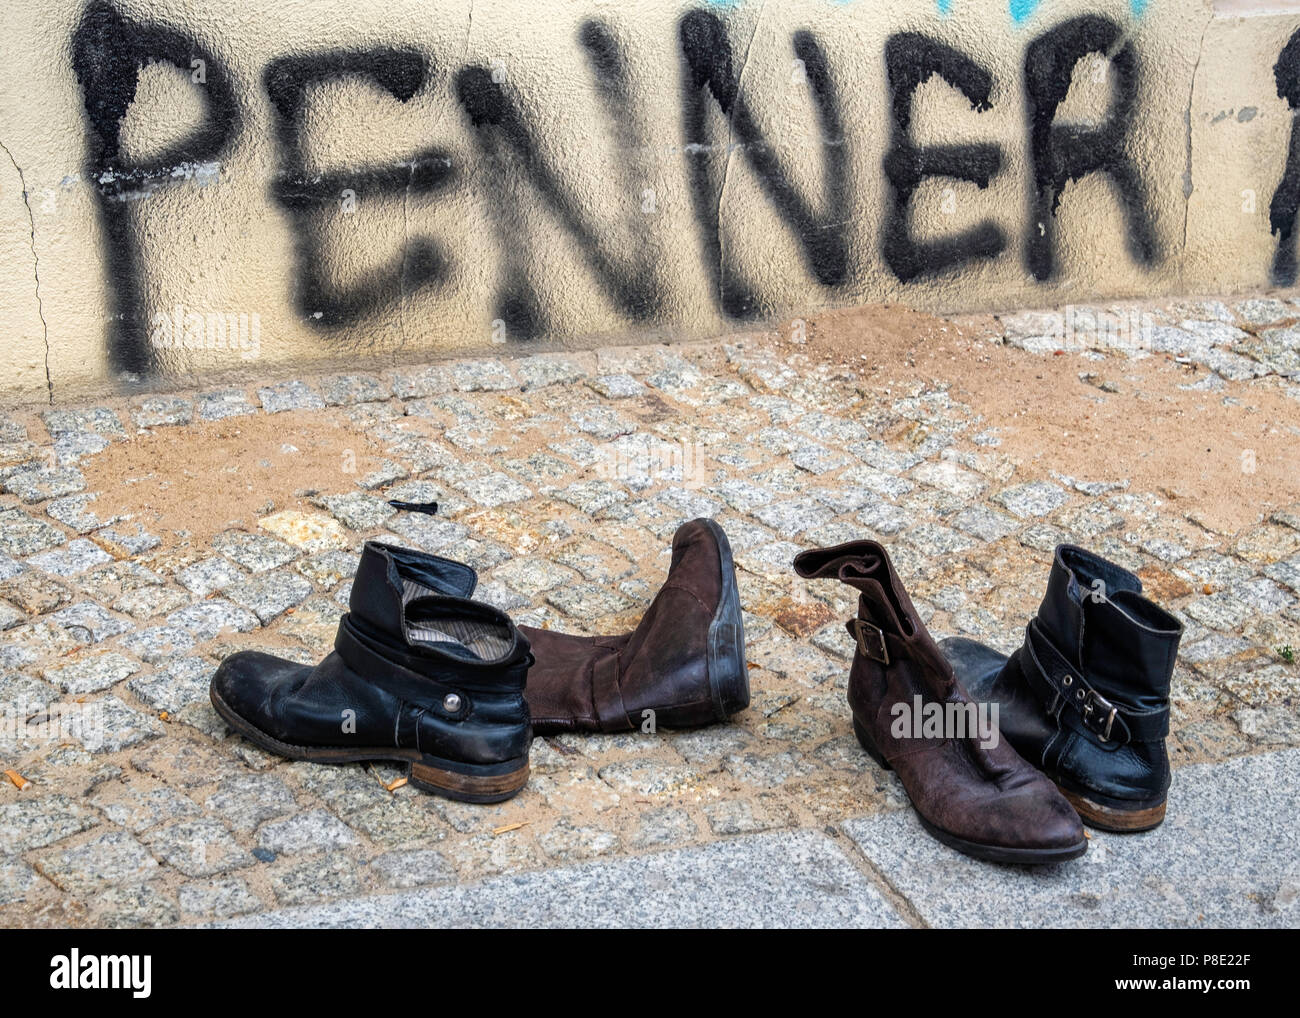 Berlin,Mitte. Urban Still life. Discarded, second hand, used boots on a city pavement with graffiti Stock Photo